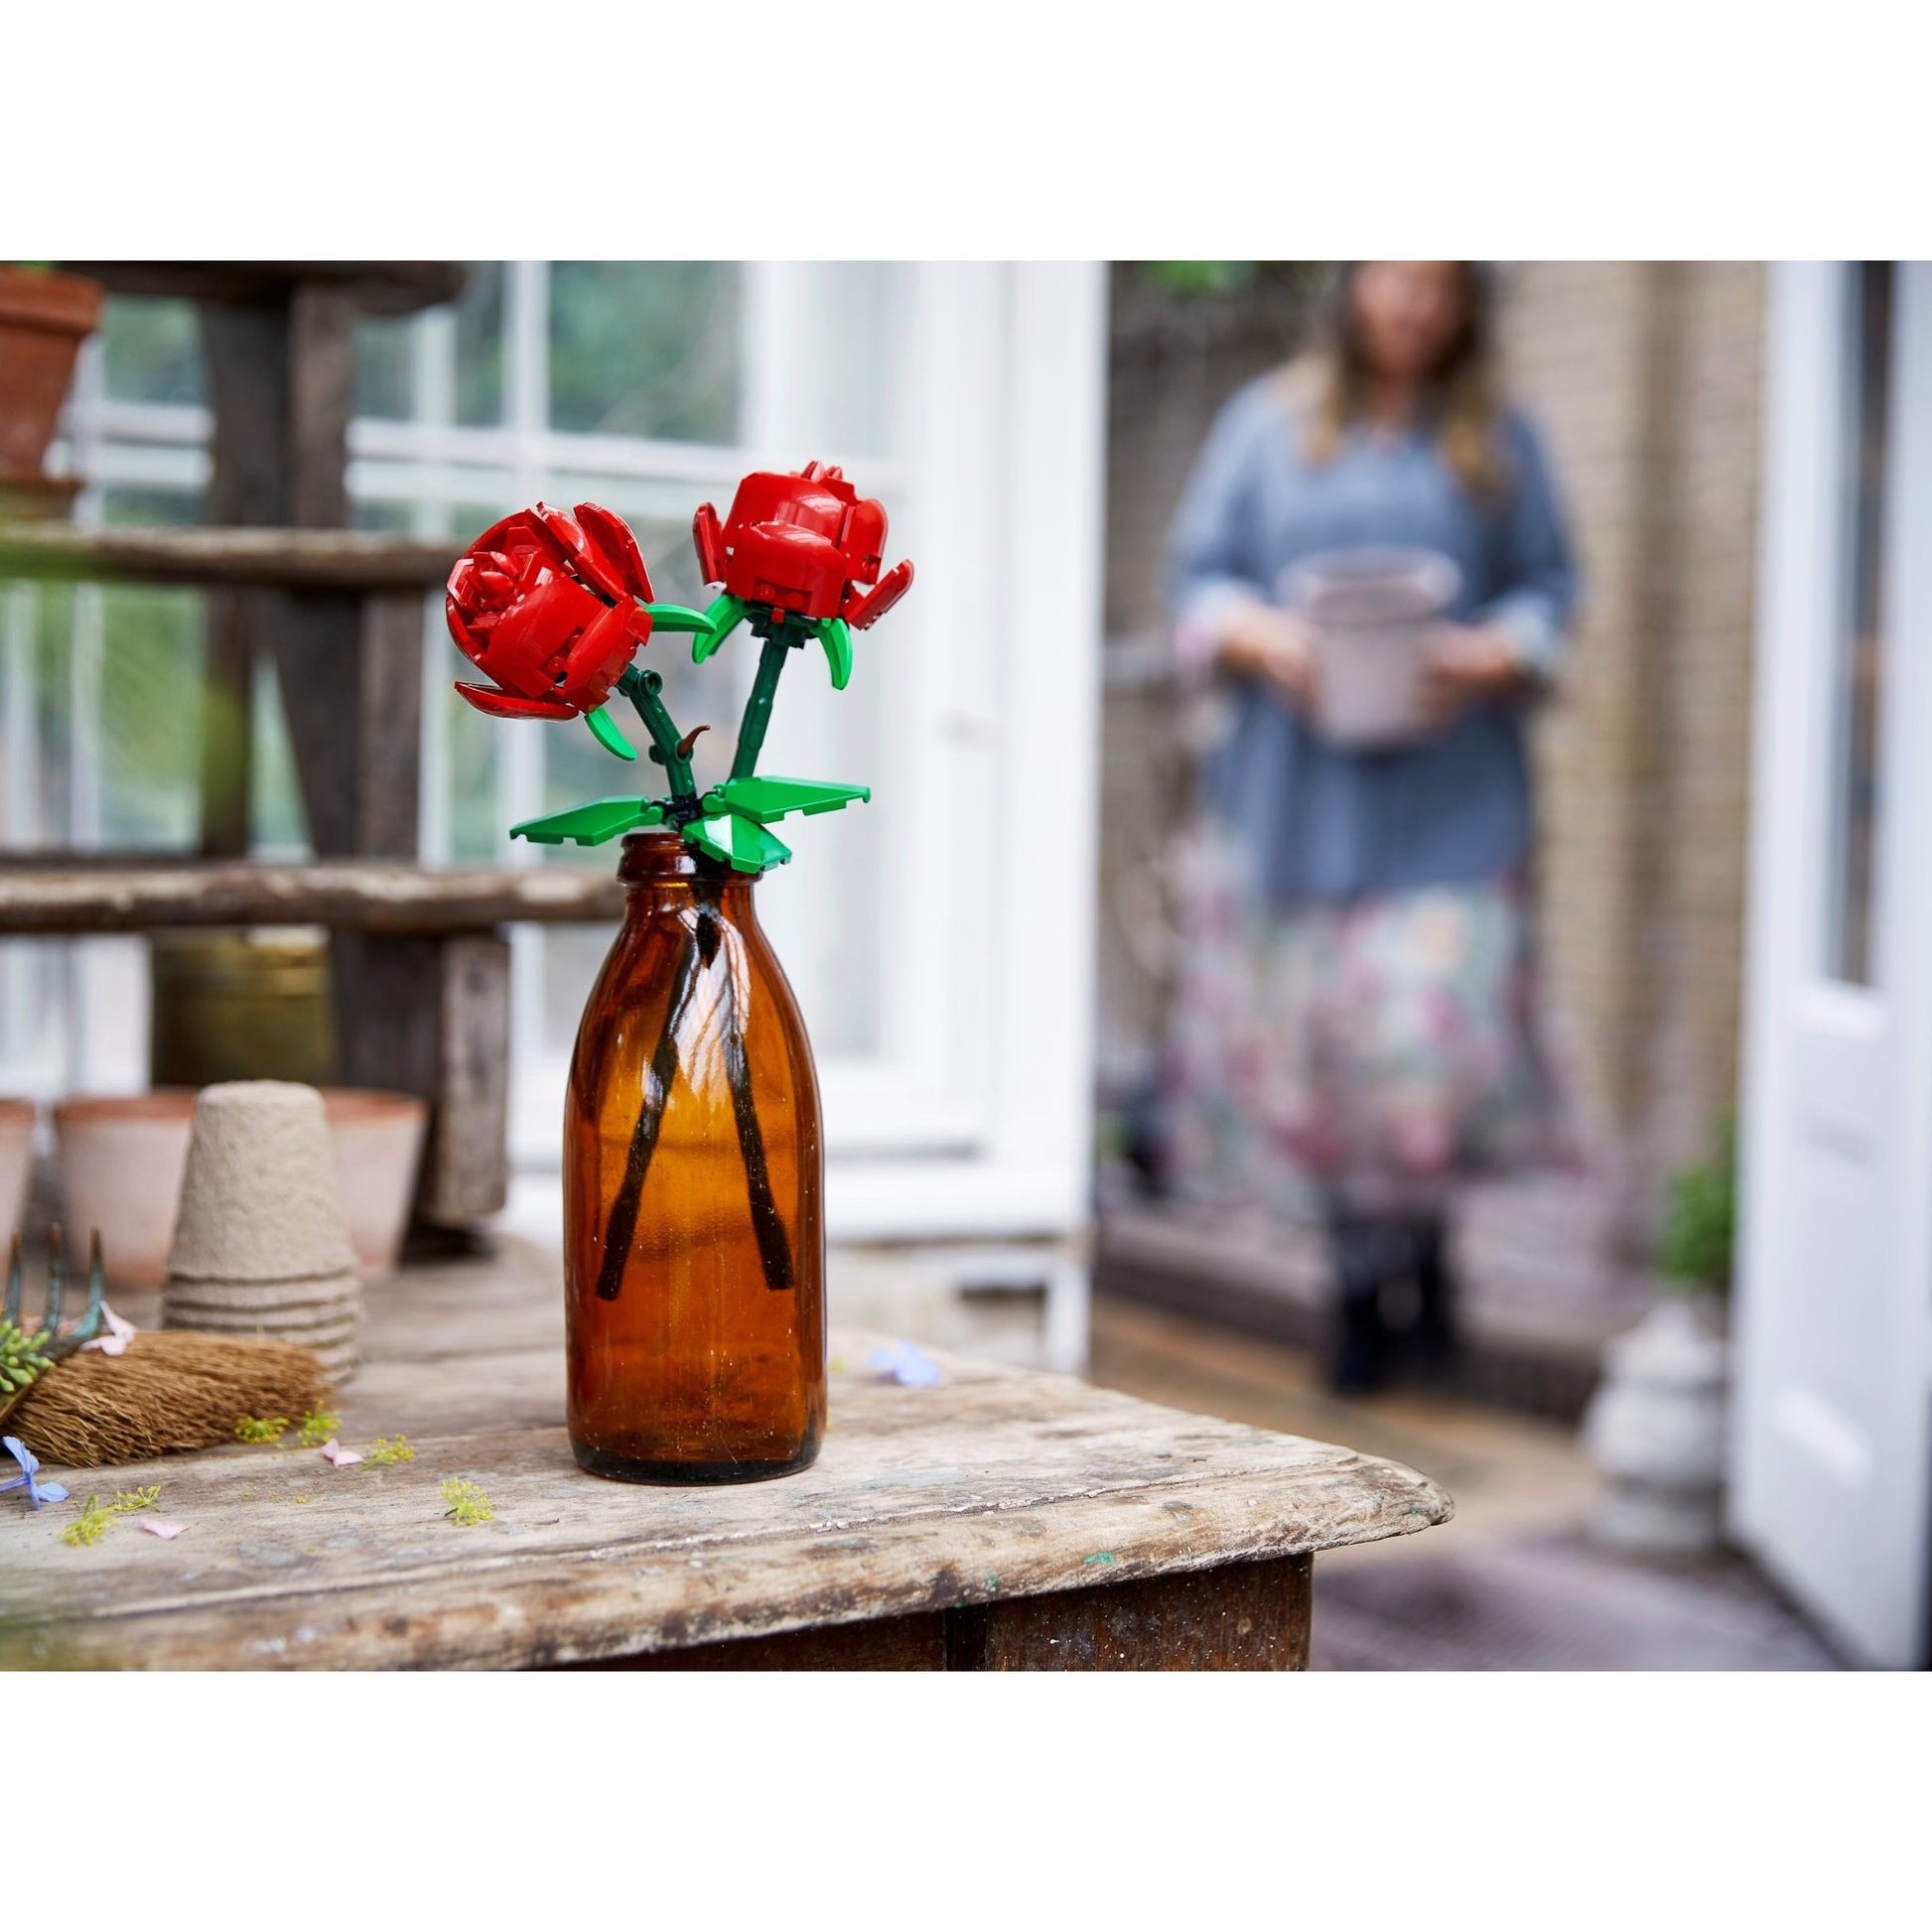 Two Lego red roses in a brown bottle on an old rustic wooden table. There is a woman in the background.